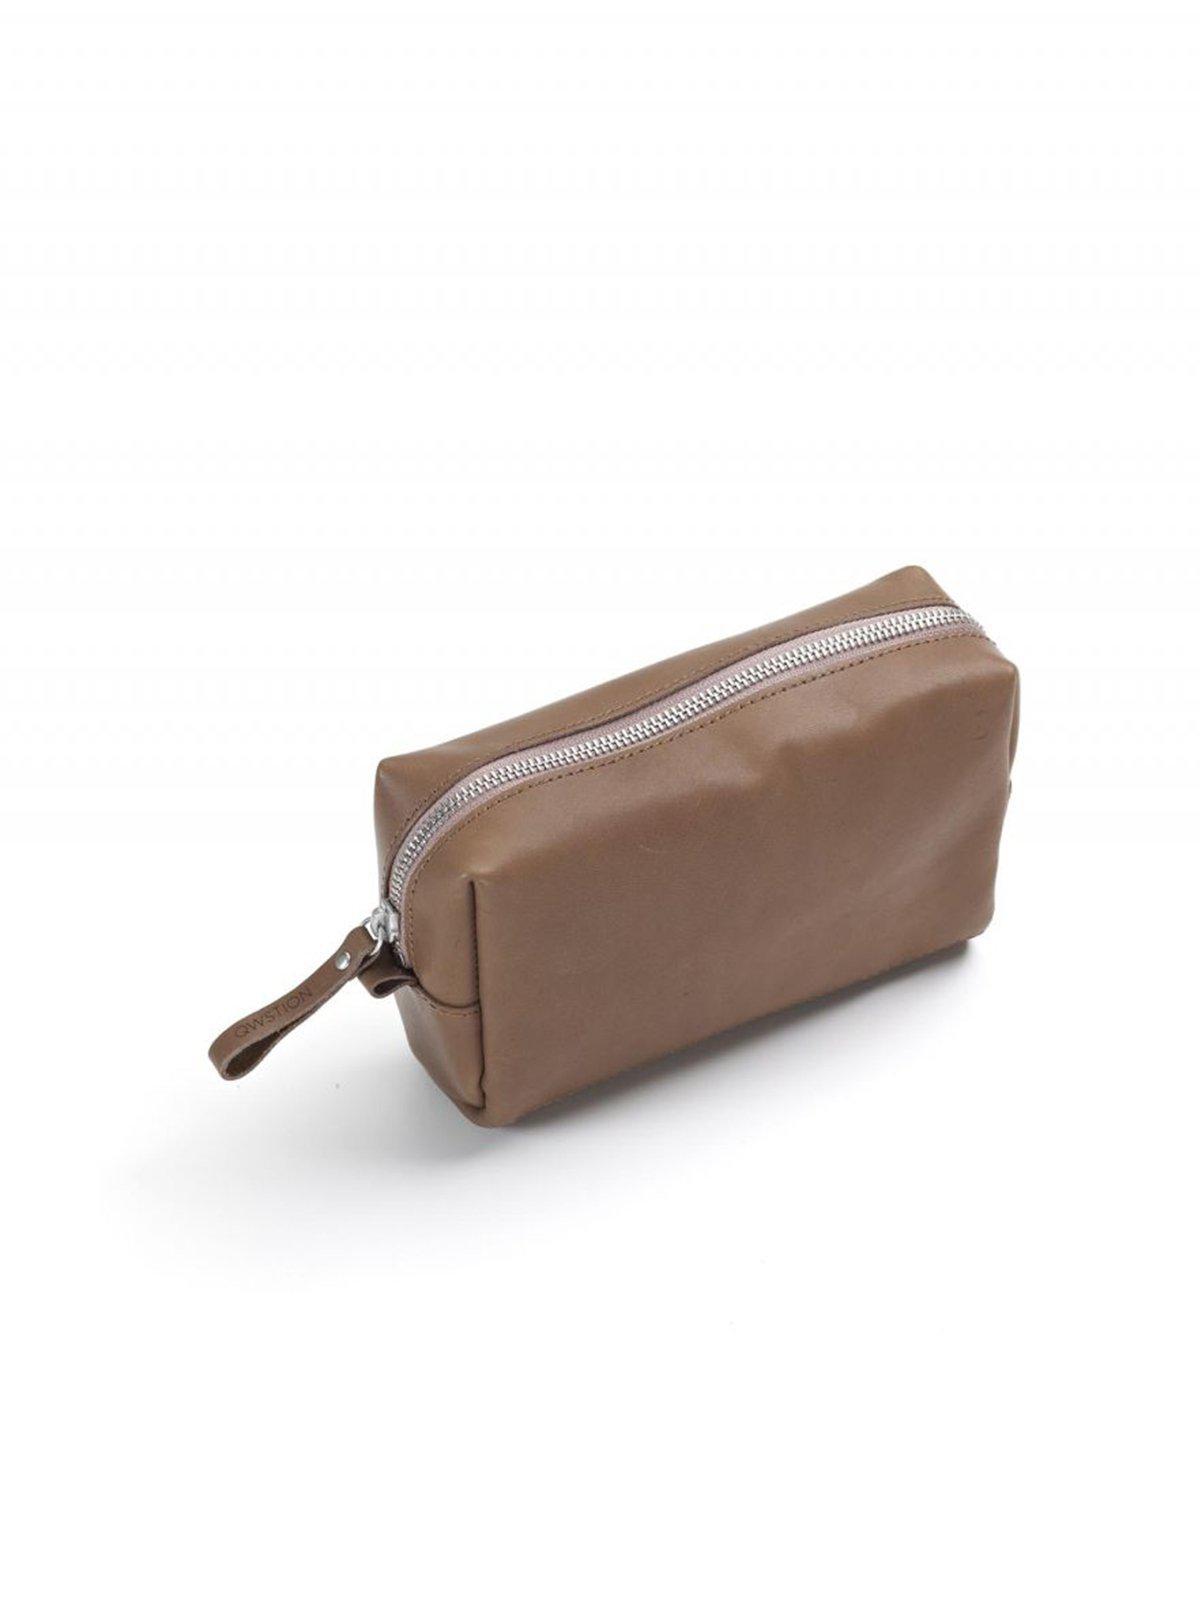 Qwstion Amenity Pouch Brown Leather Canvas - MORE by Morello Indonesia